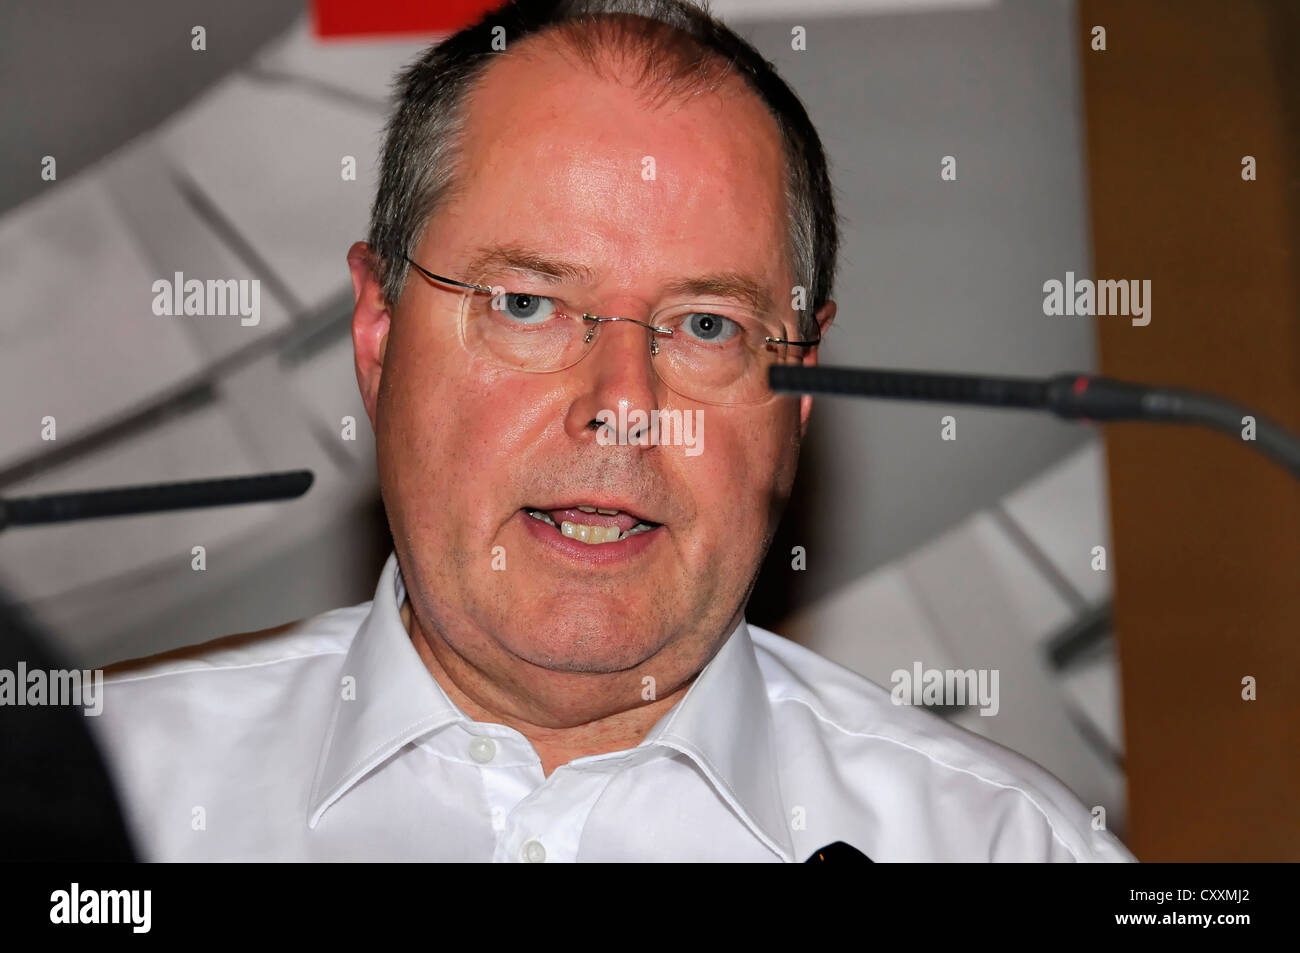 Peer Steinbrueck, member of the German Bundestag, parliament, during an election campaign, 26/08/2009, Schwaebisch-Gmuend Stock Photo